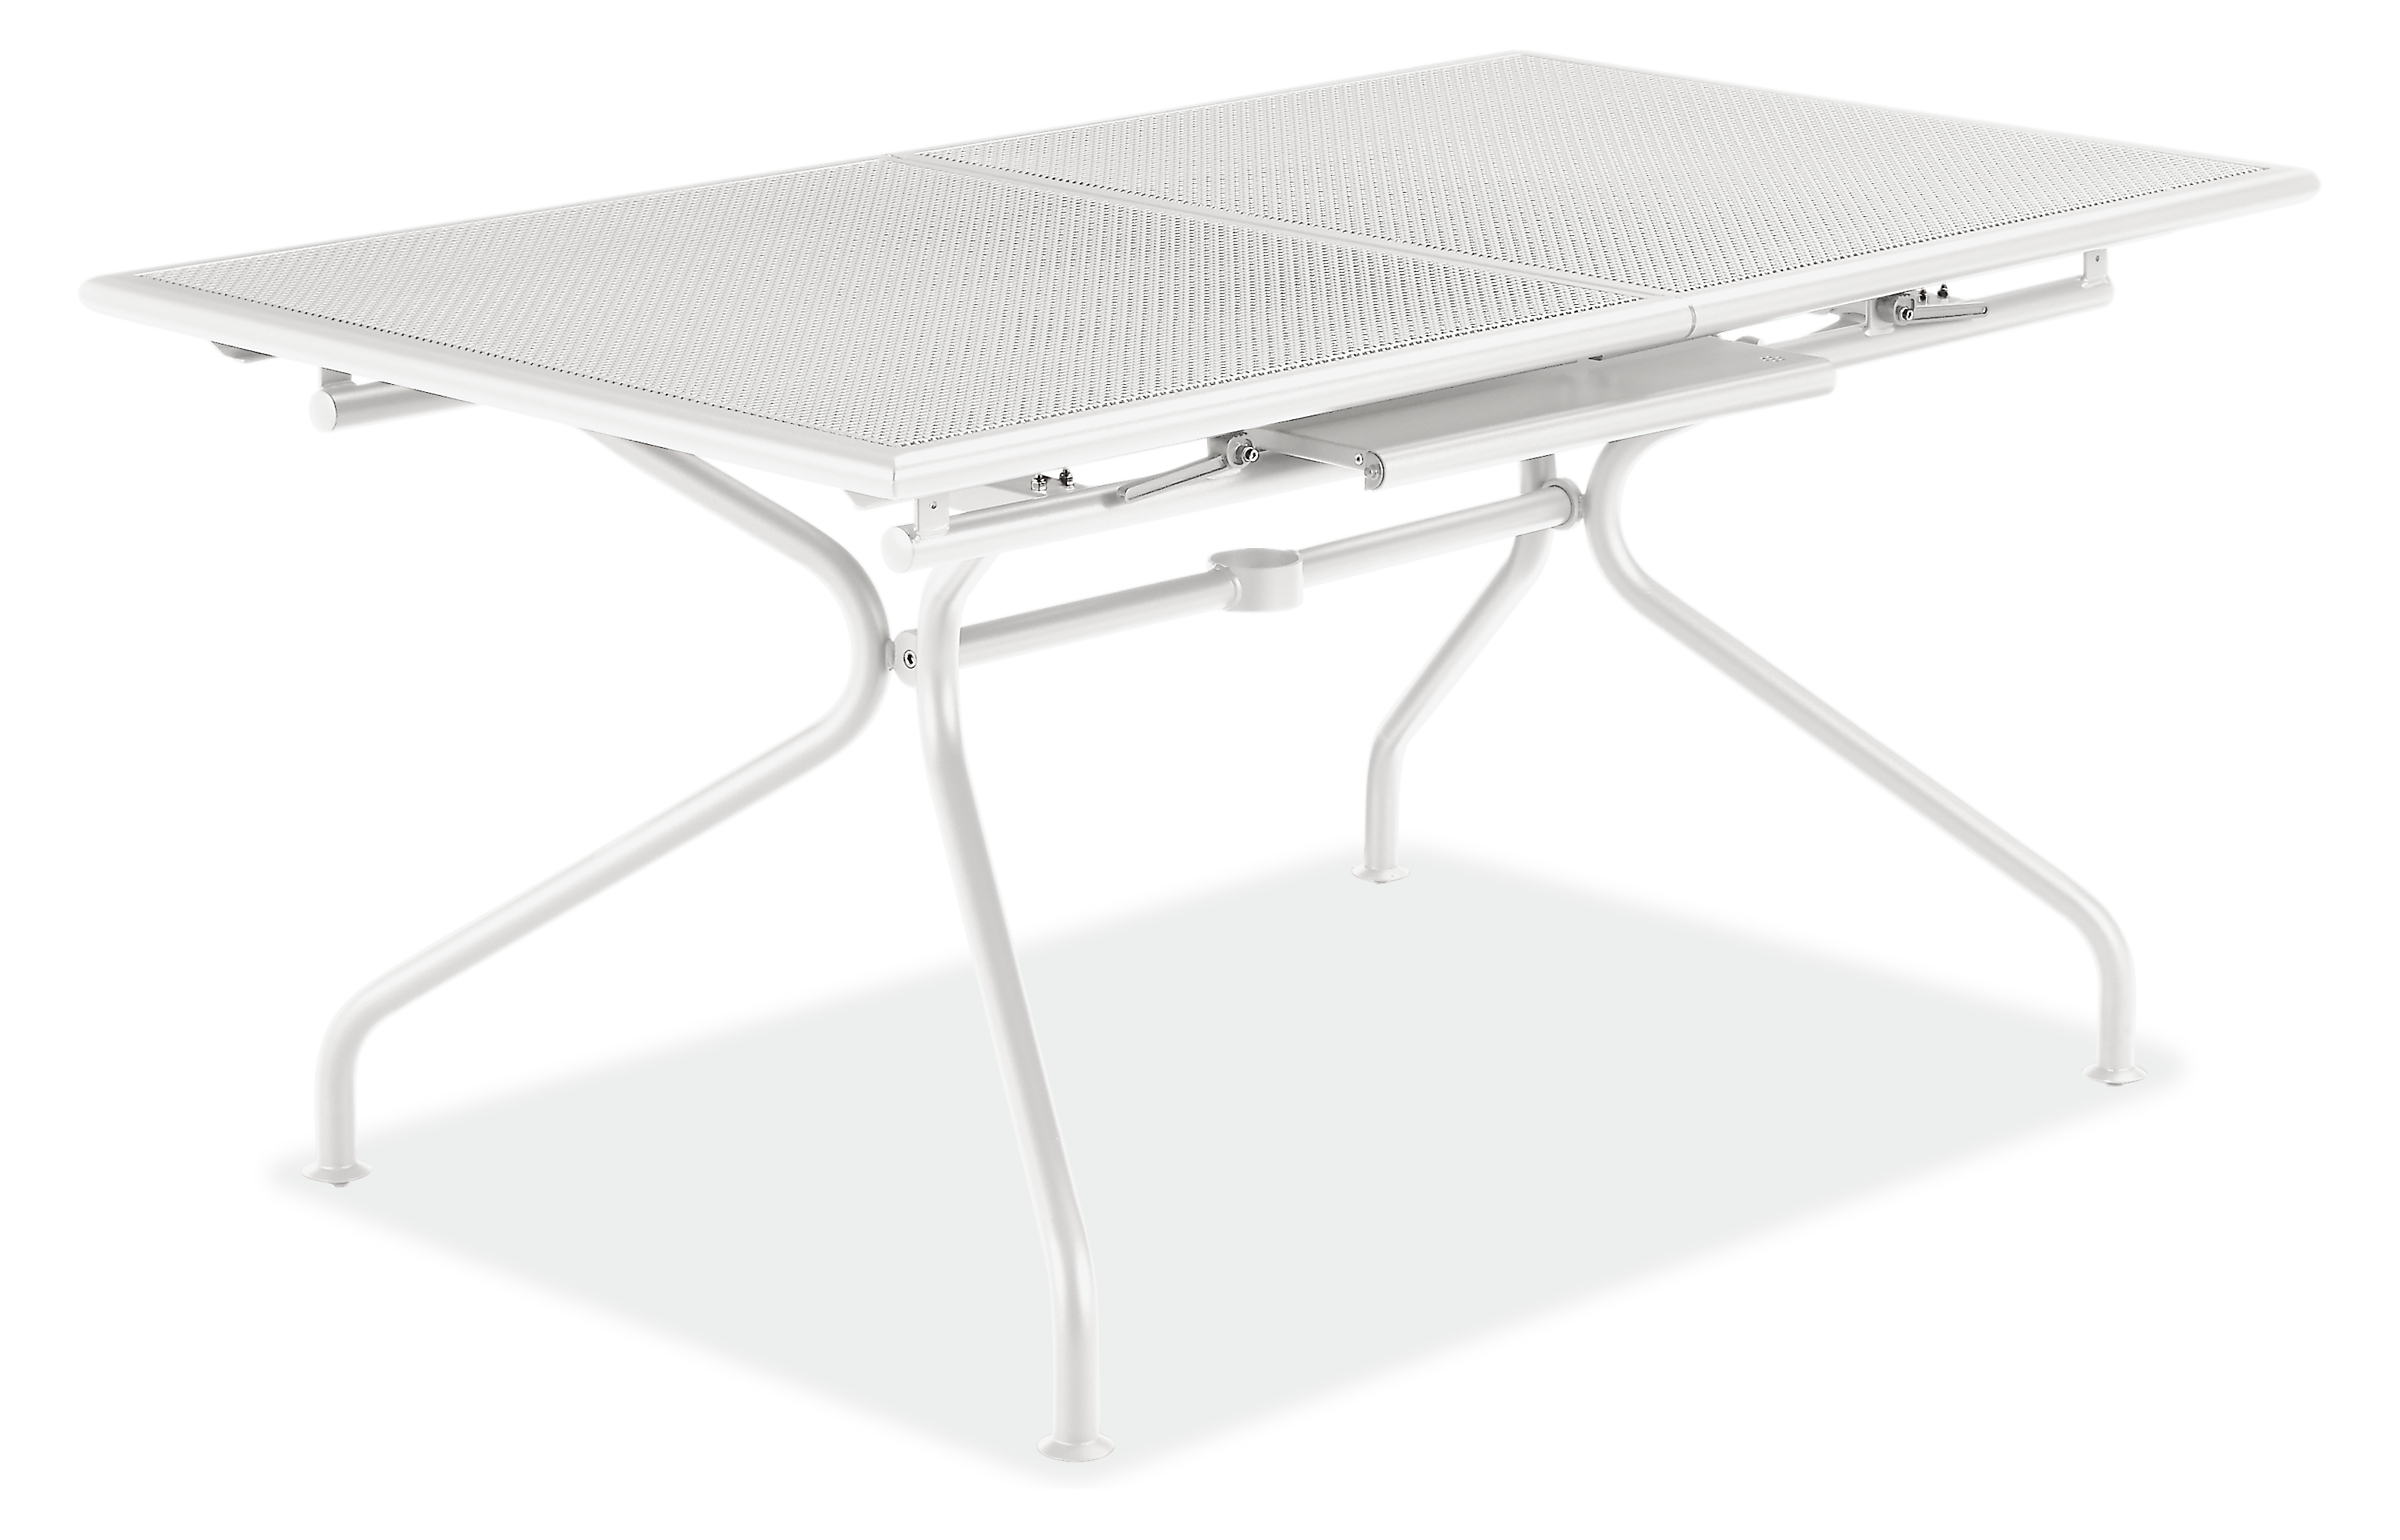 Kona 63w 36d 30h Extension Table with One 20" Leaf in White